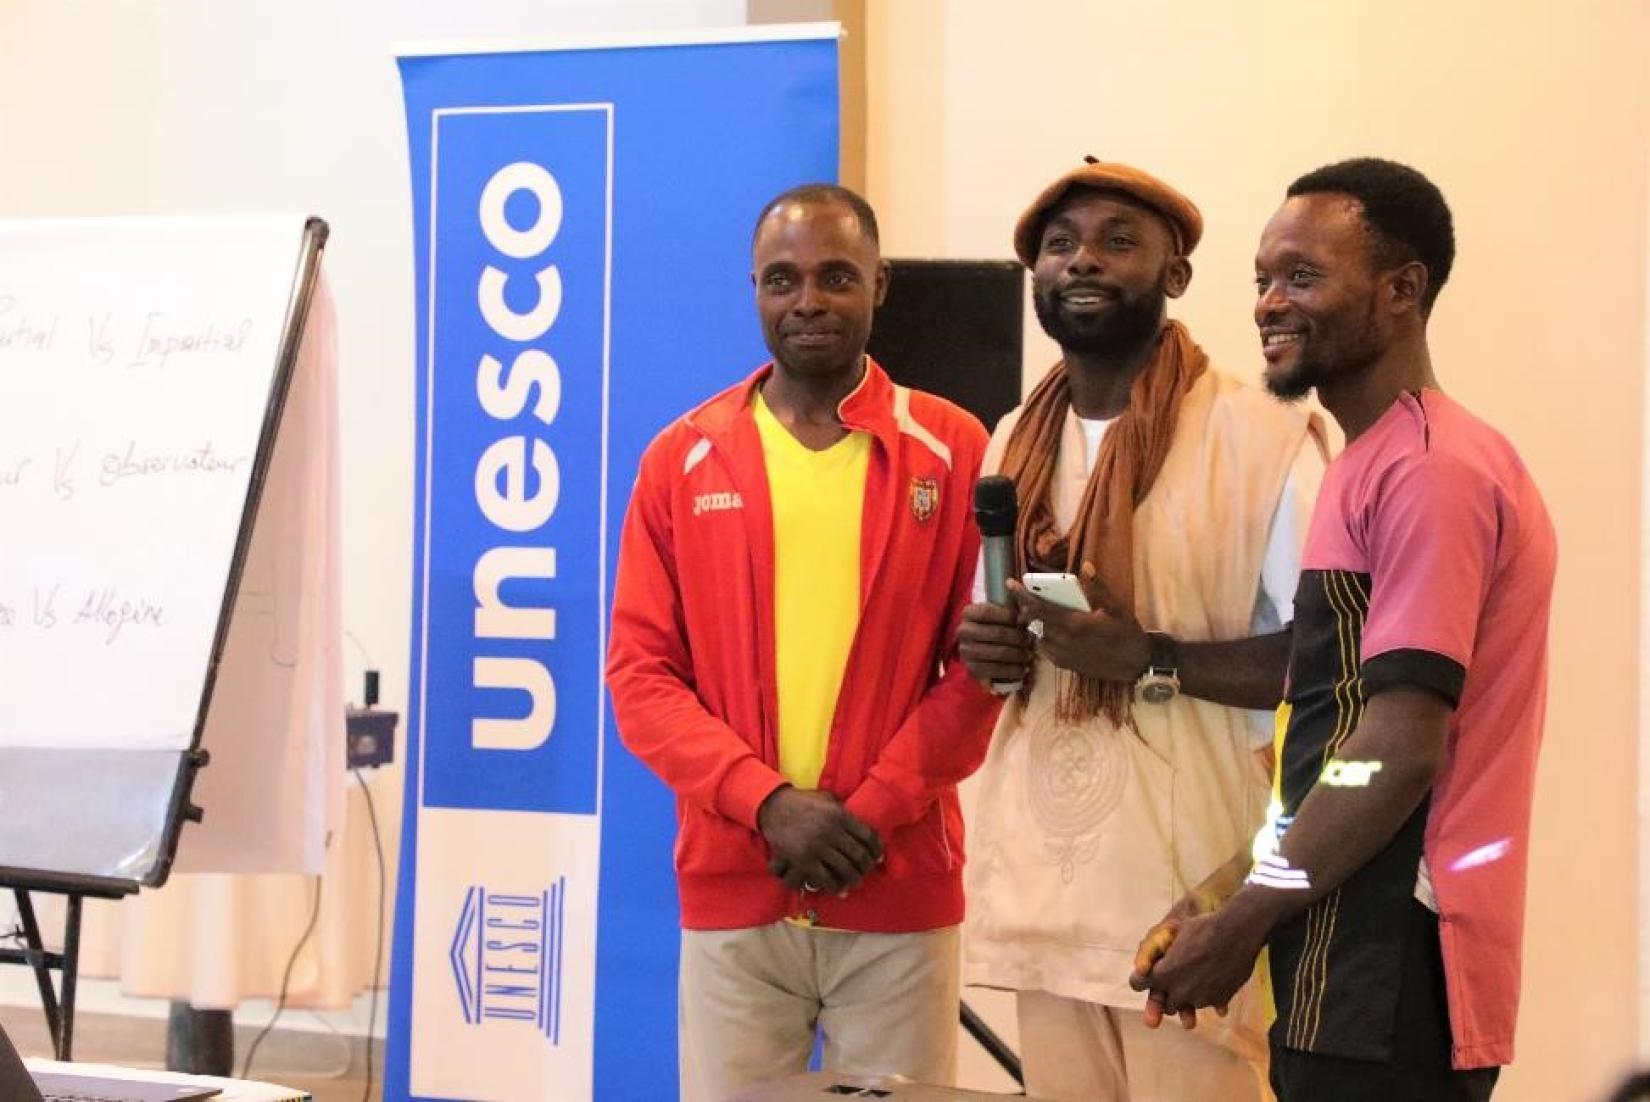 The budding music group inspired by UNESCO’s quest for peace